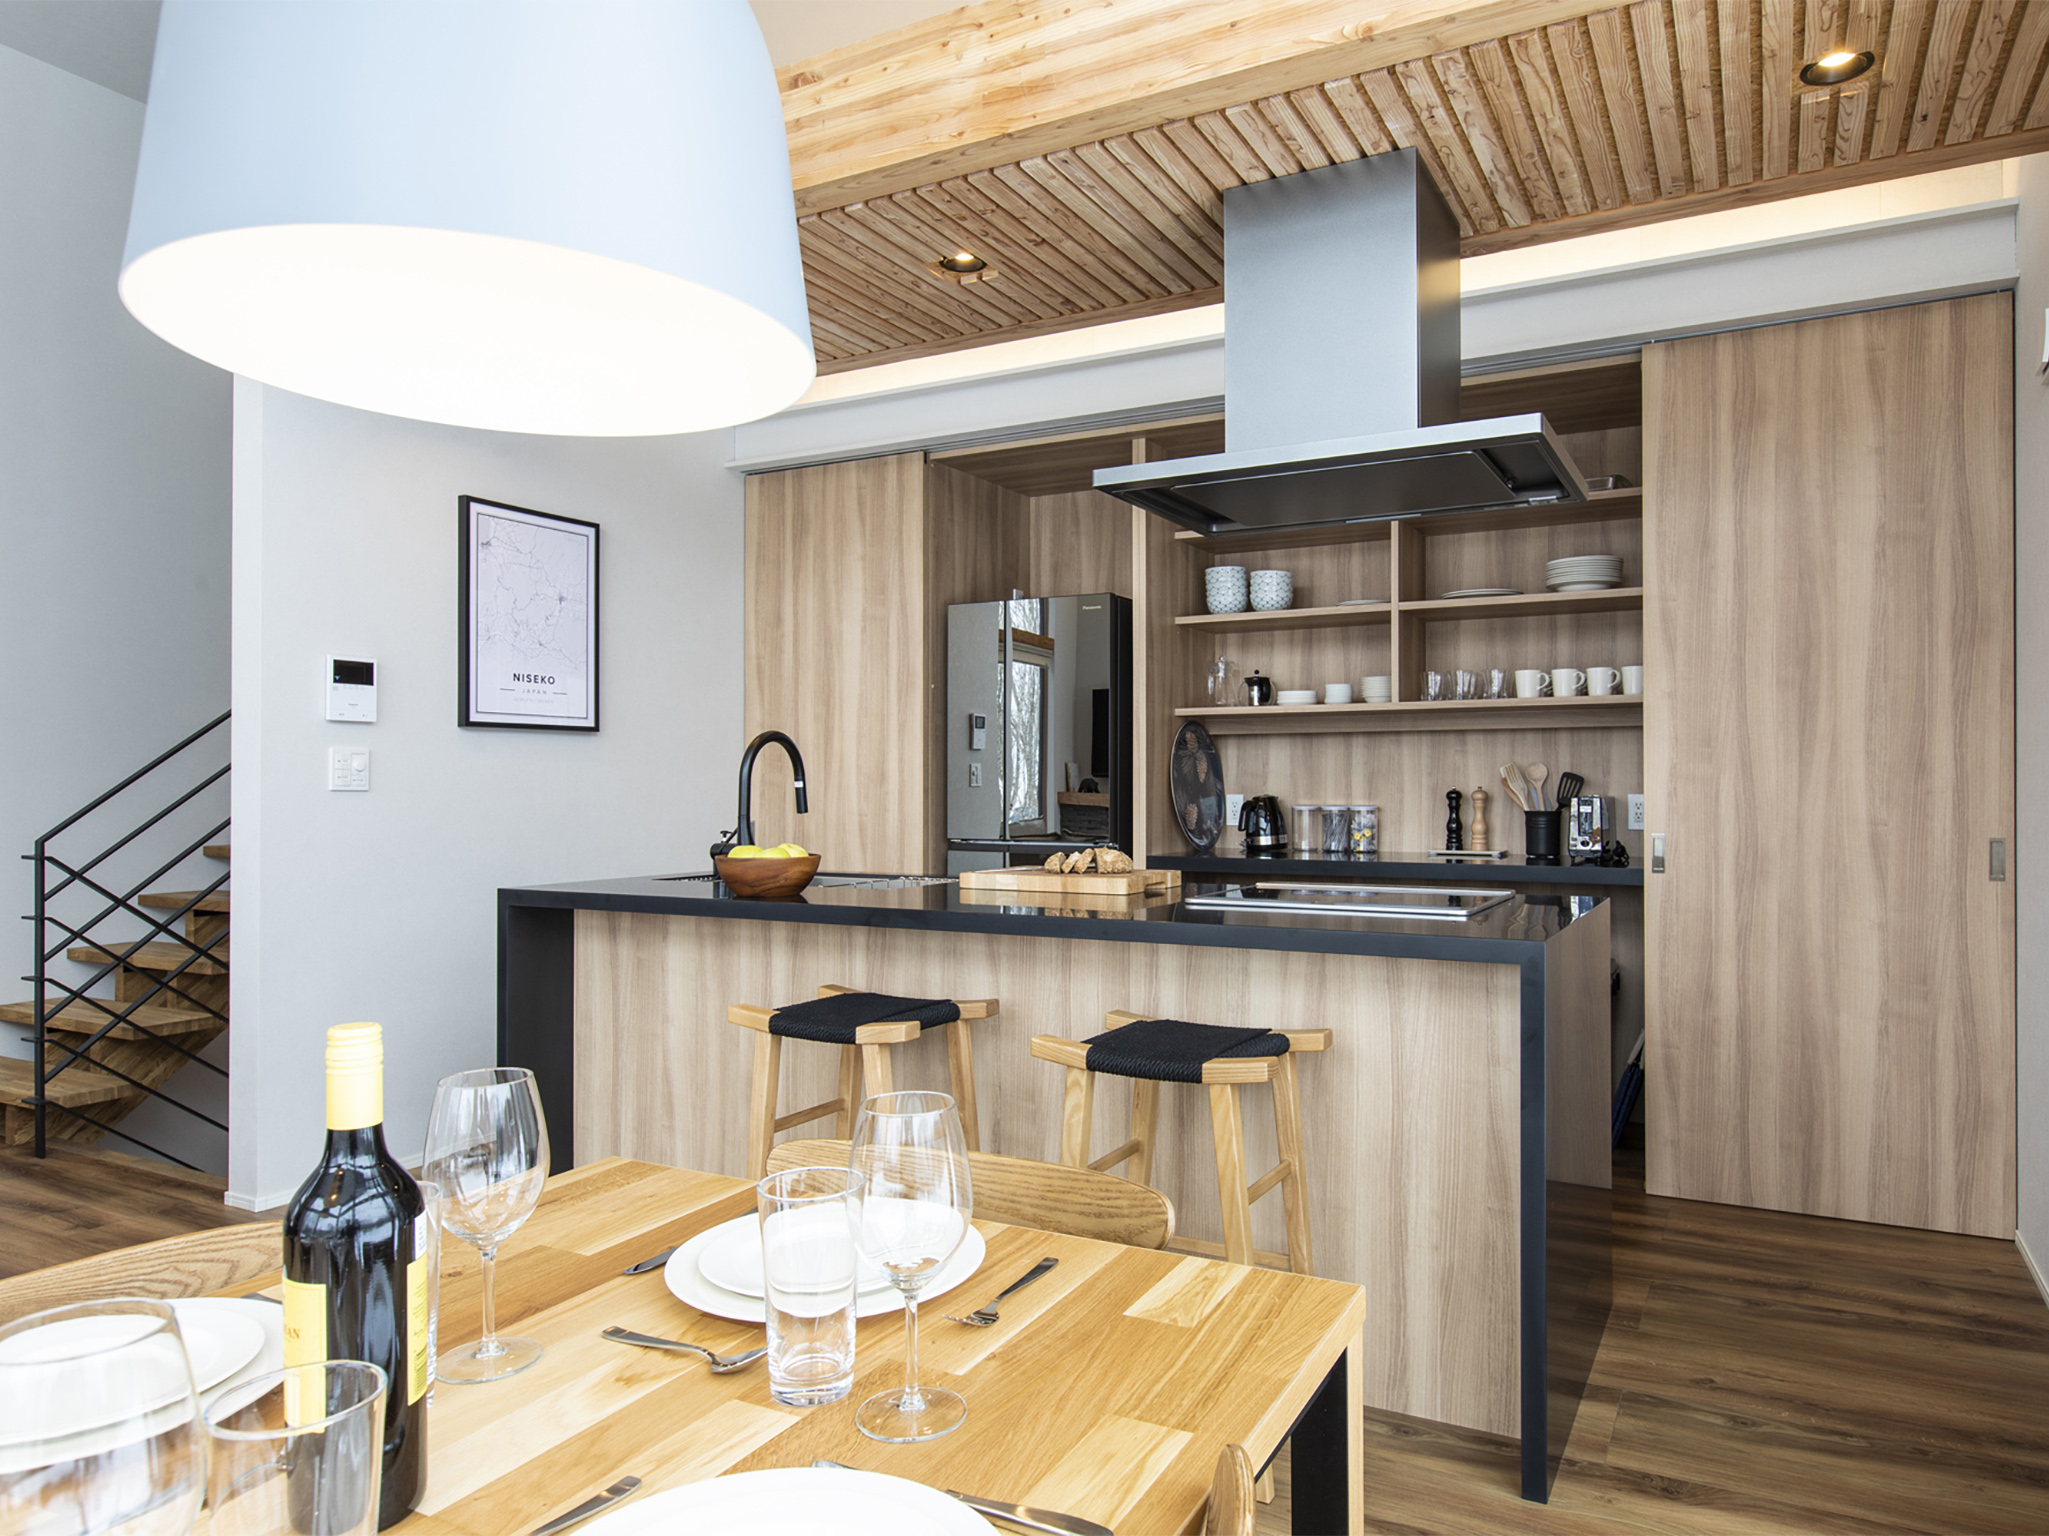 Ukiyo Chalet - Dining area and kitchen preview